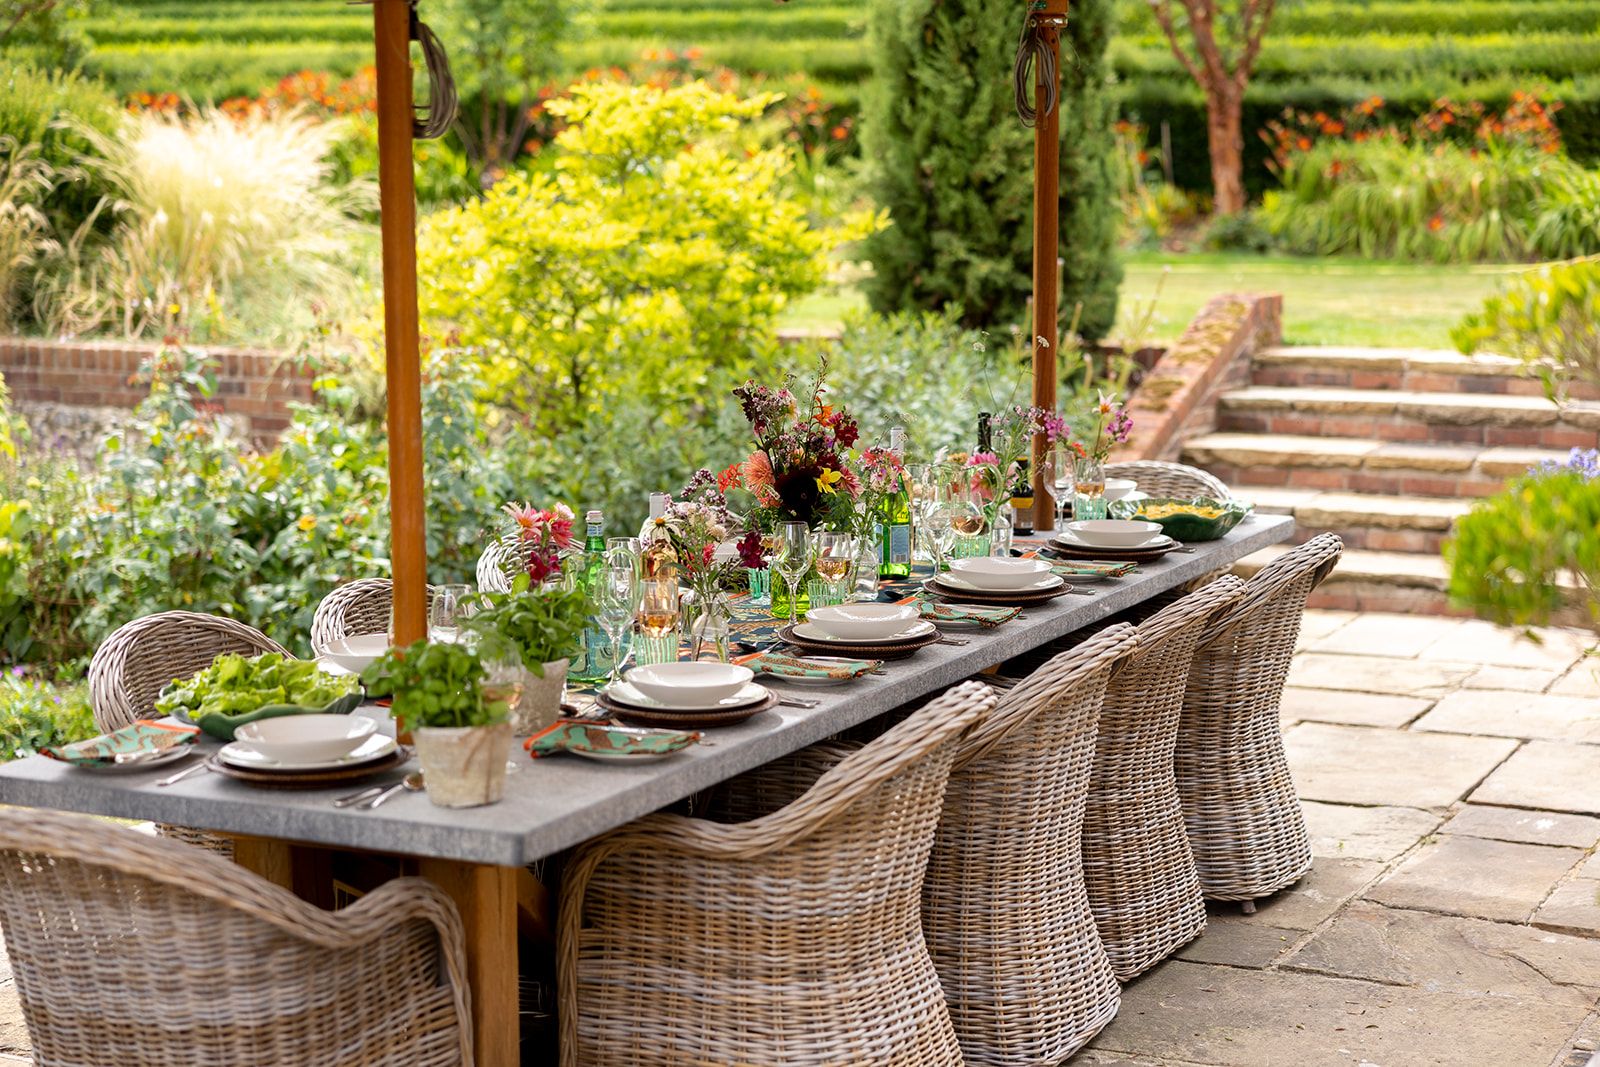 A decorated and laid garden table surrounded by woven chairs on a patio area